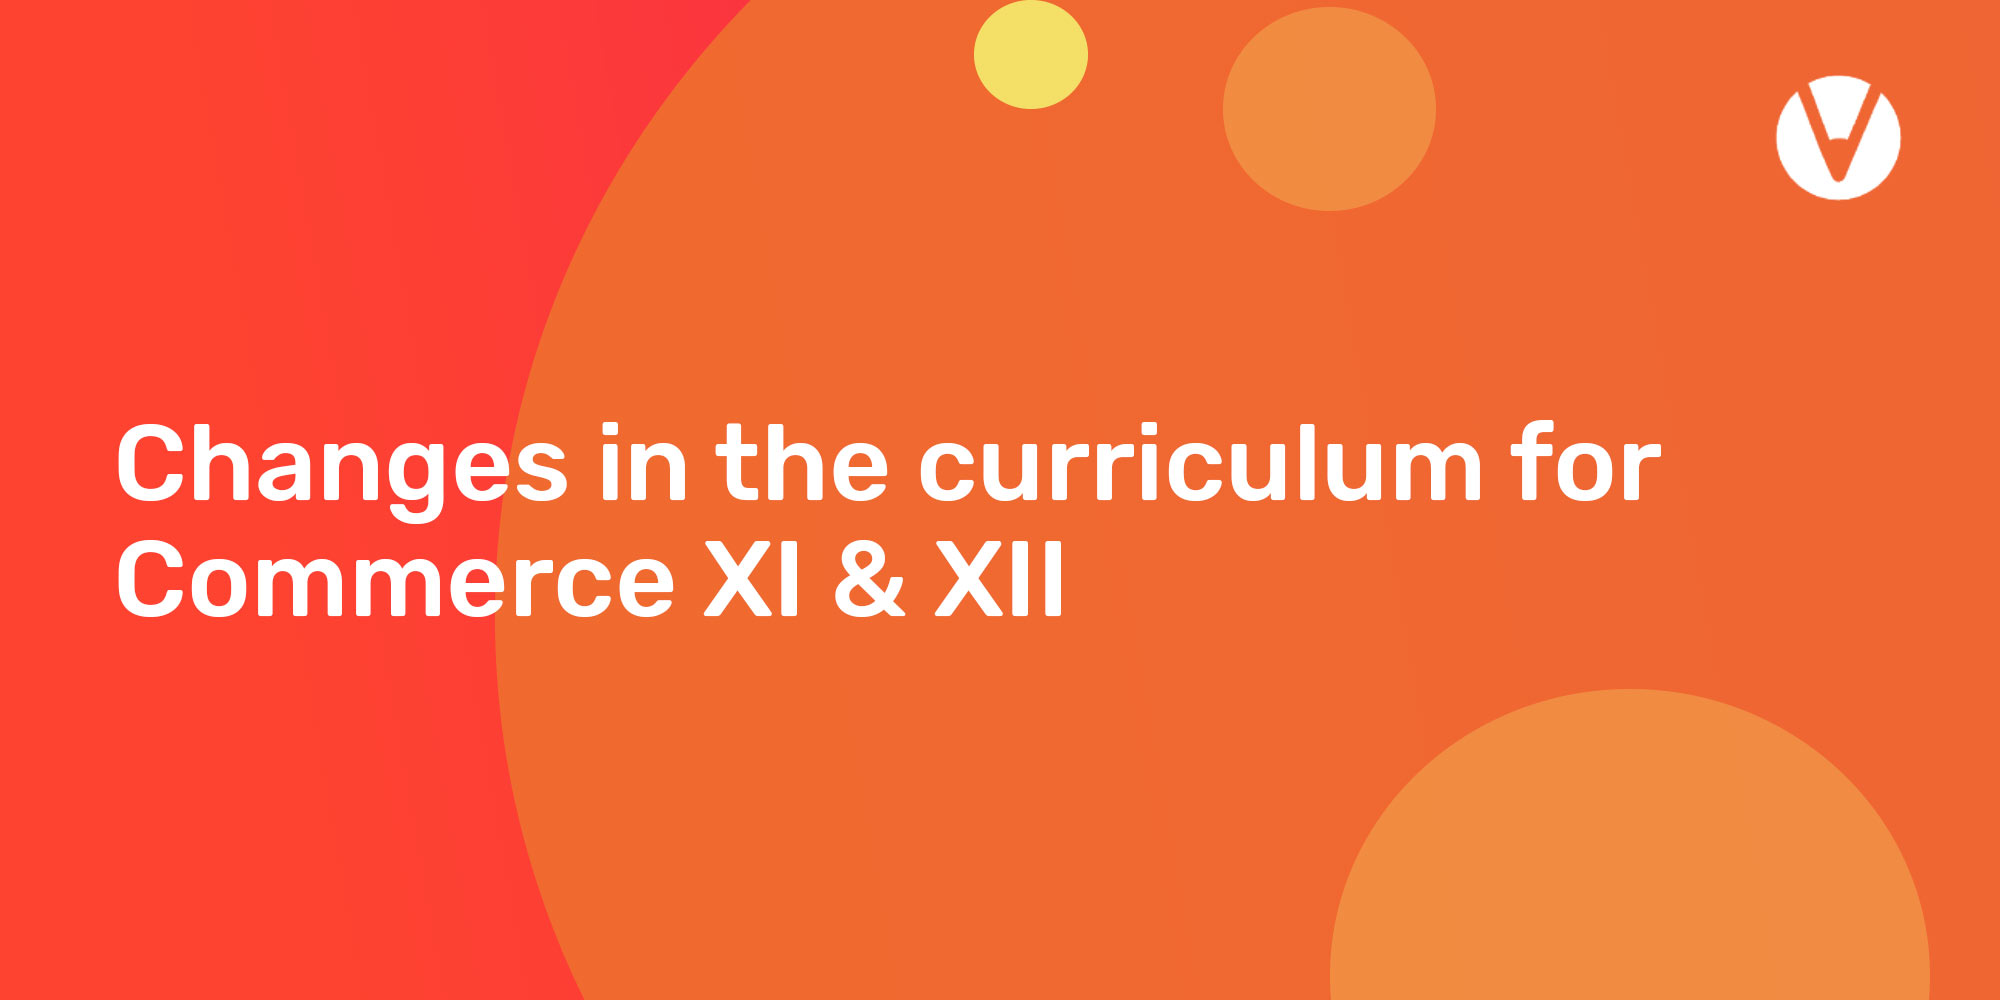 Changes in the Curriculum for Commerce XI & XII